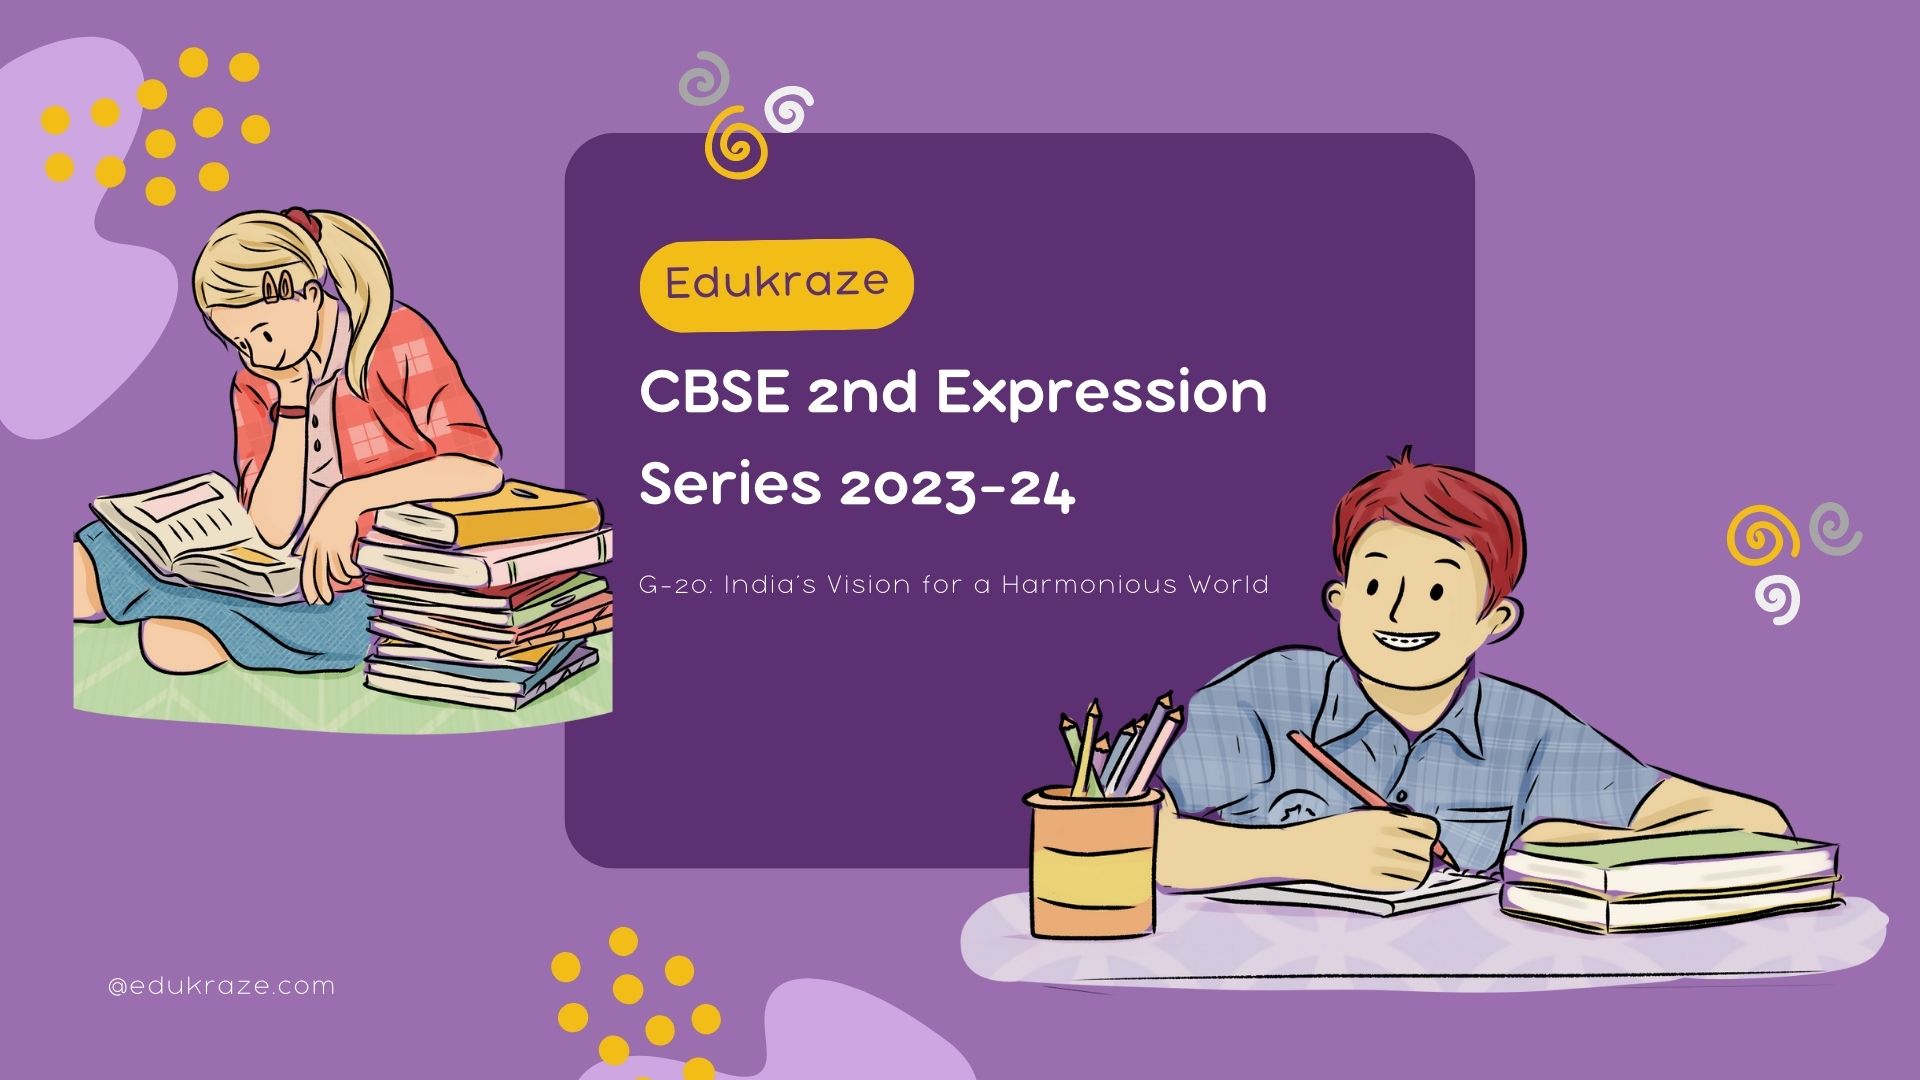 You are currently viewing CBSE 2nd Expression Series 2023-24 on Theme of G-20: India’s Vision for a Harmonious World